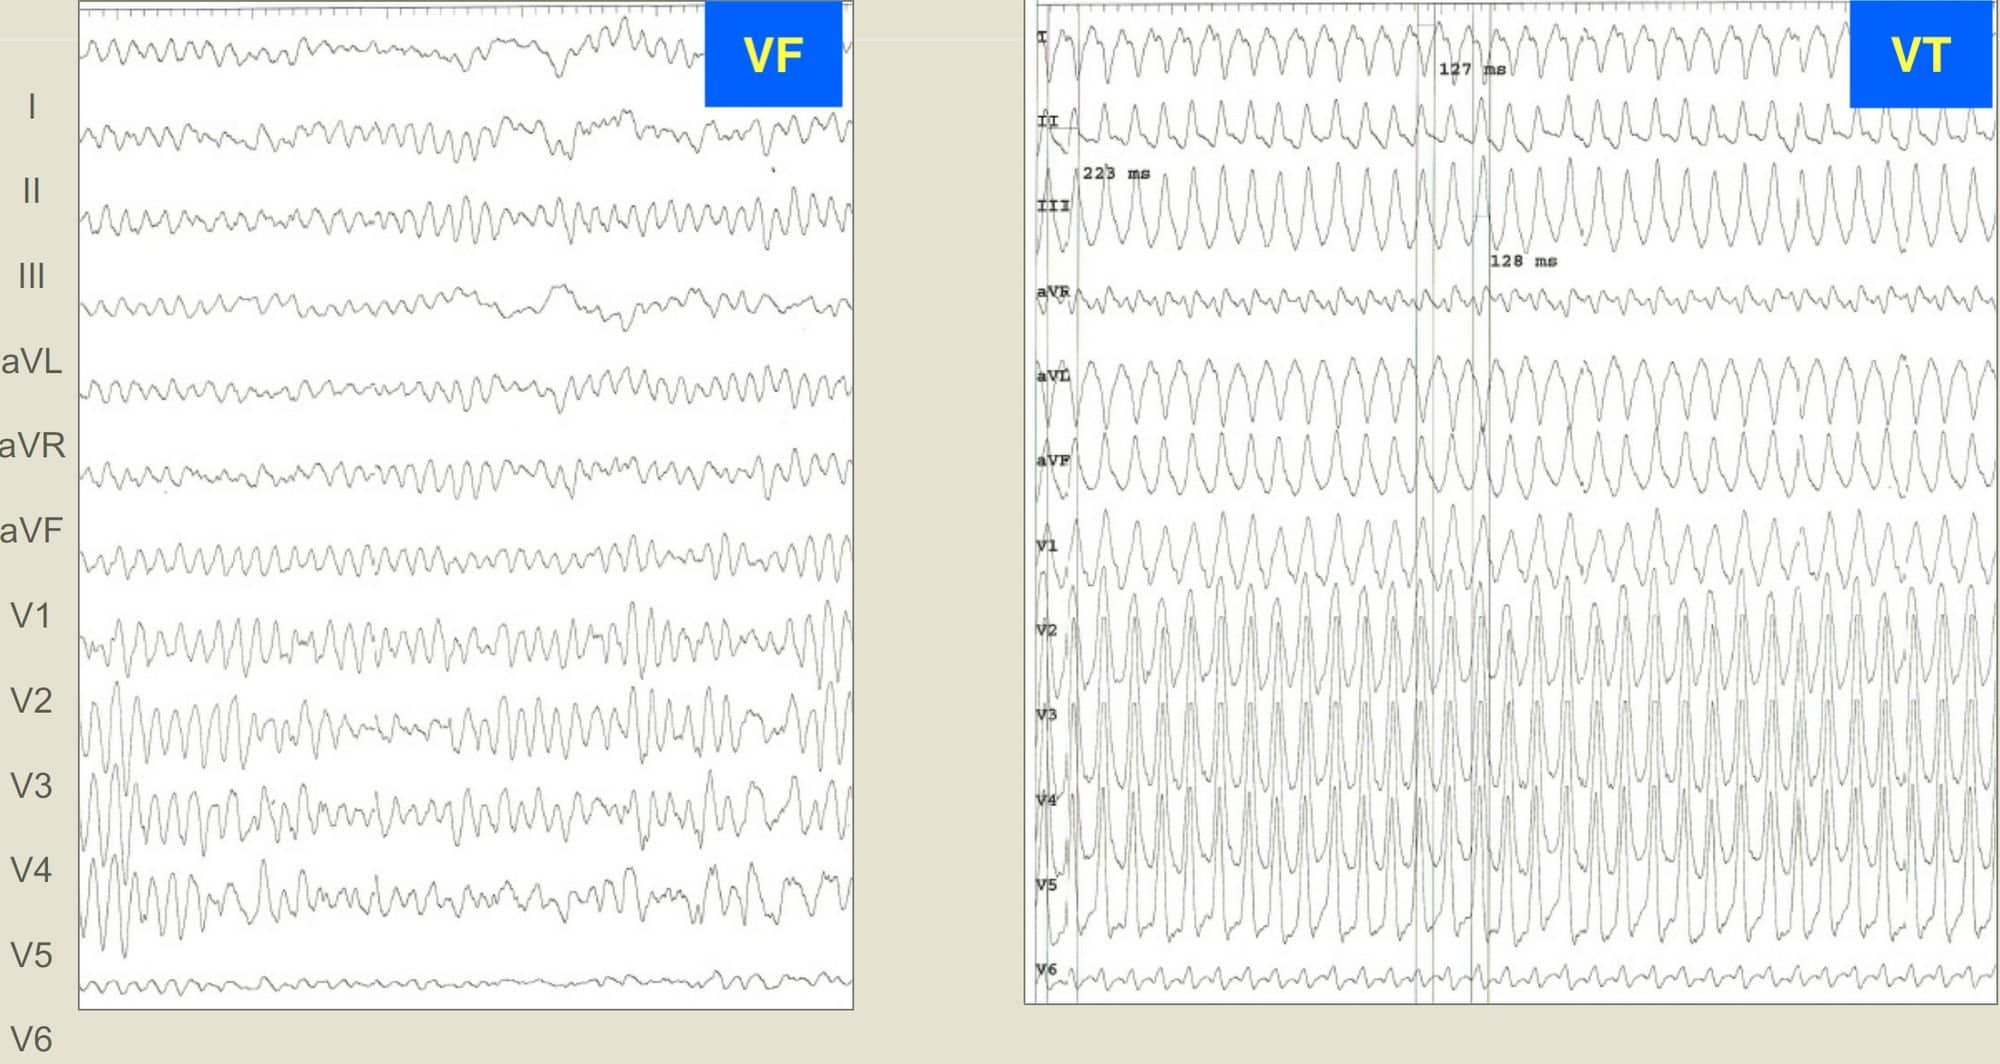 Two sample ECGs, one depicting ventricular fibrillation, the other depicting ventricular tachycardia